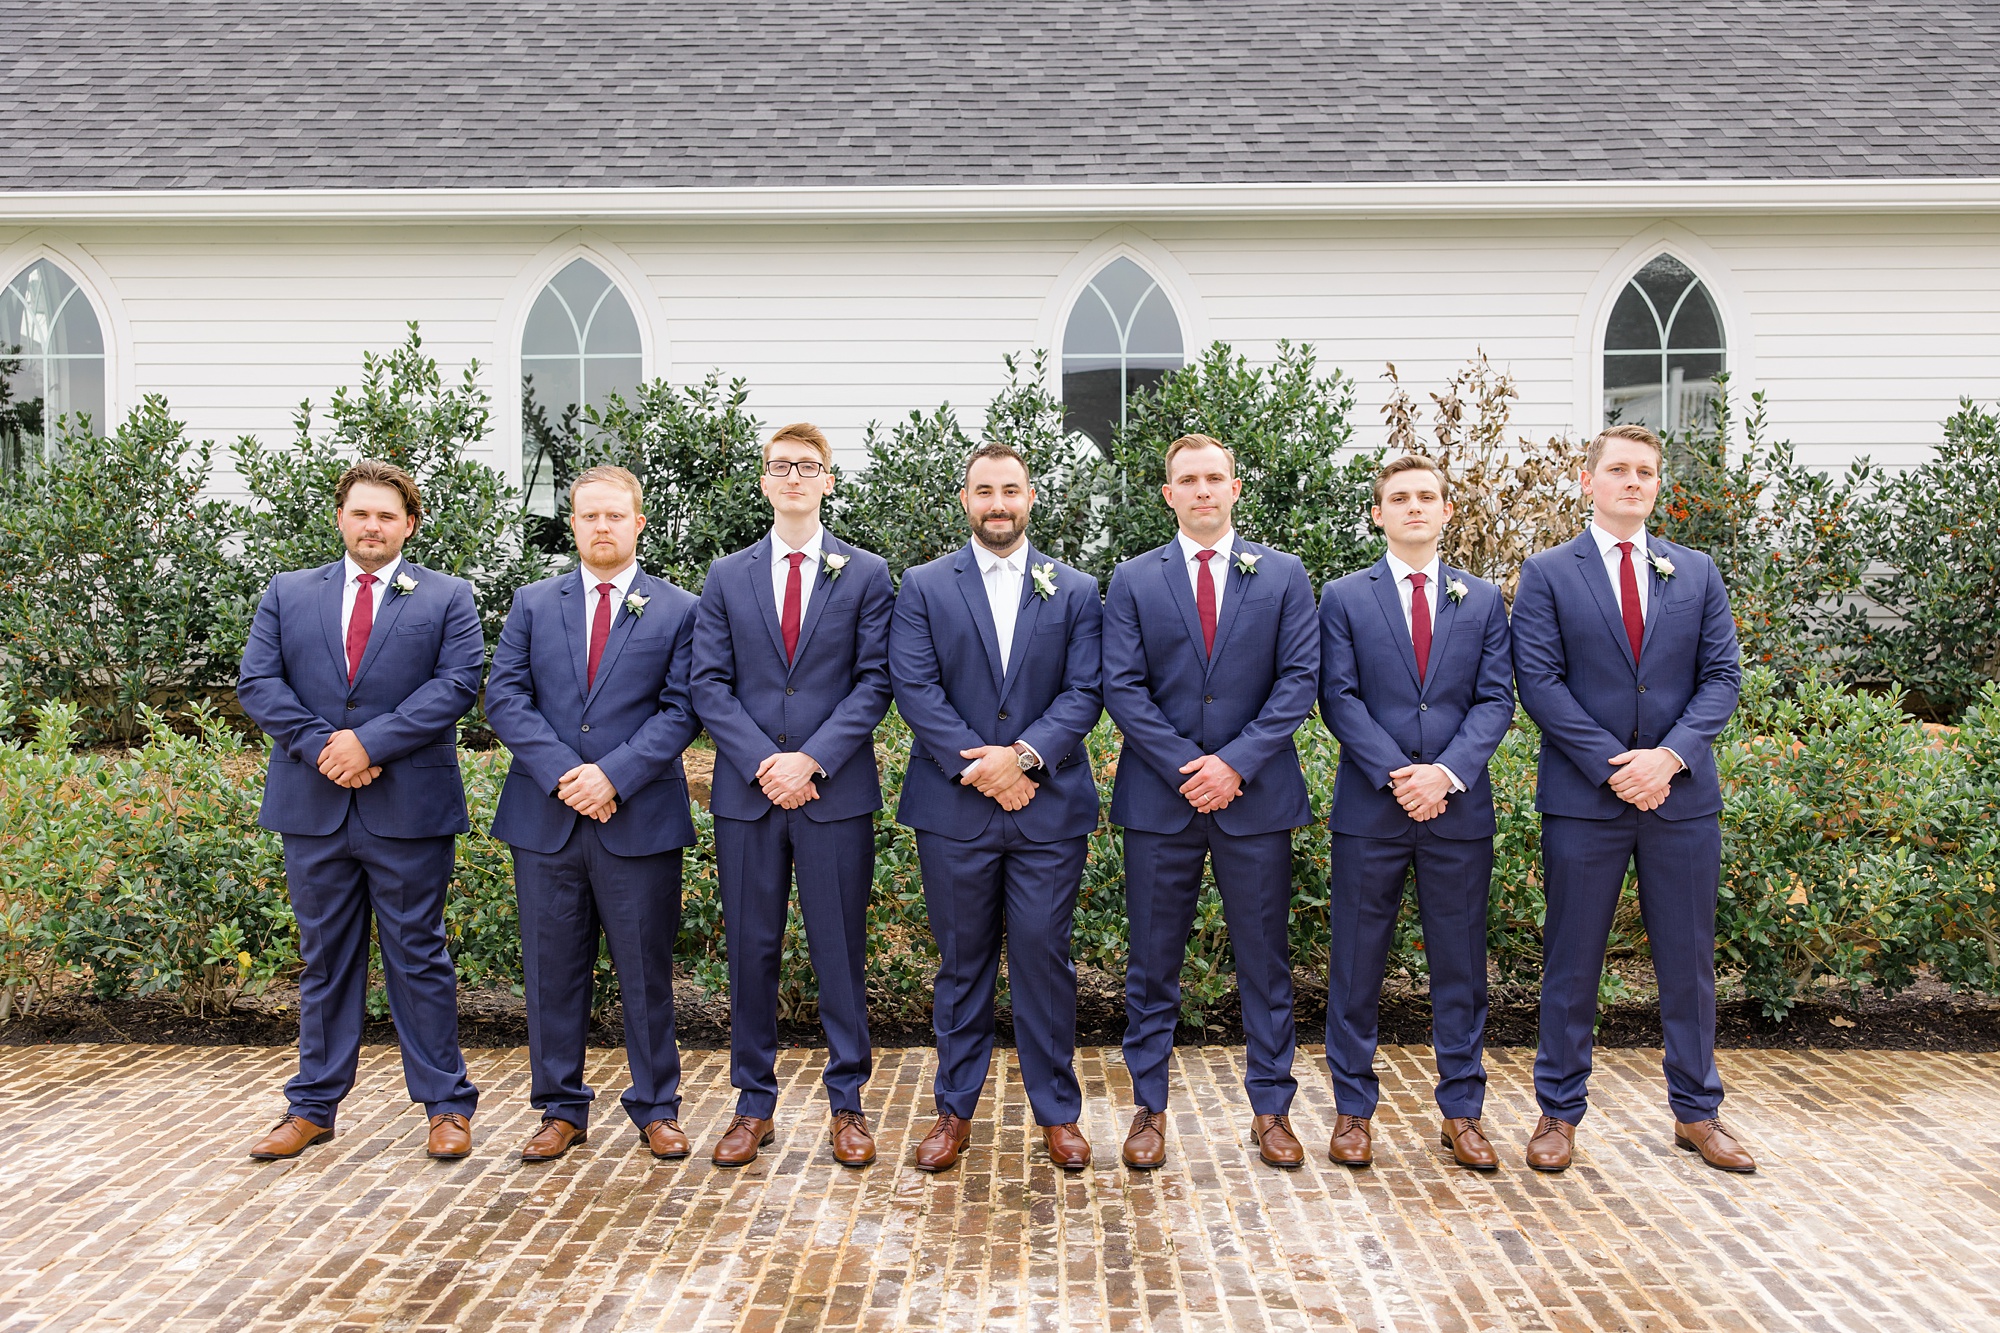 groomsmen stand with groom in navy suits with red ties